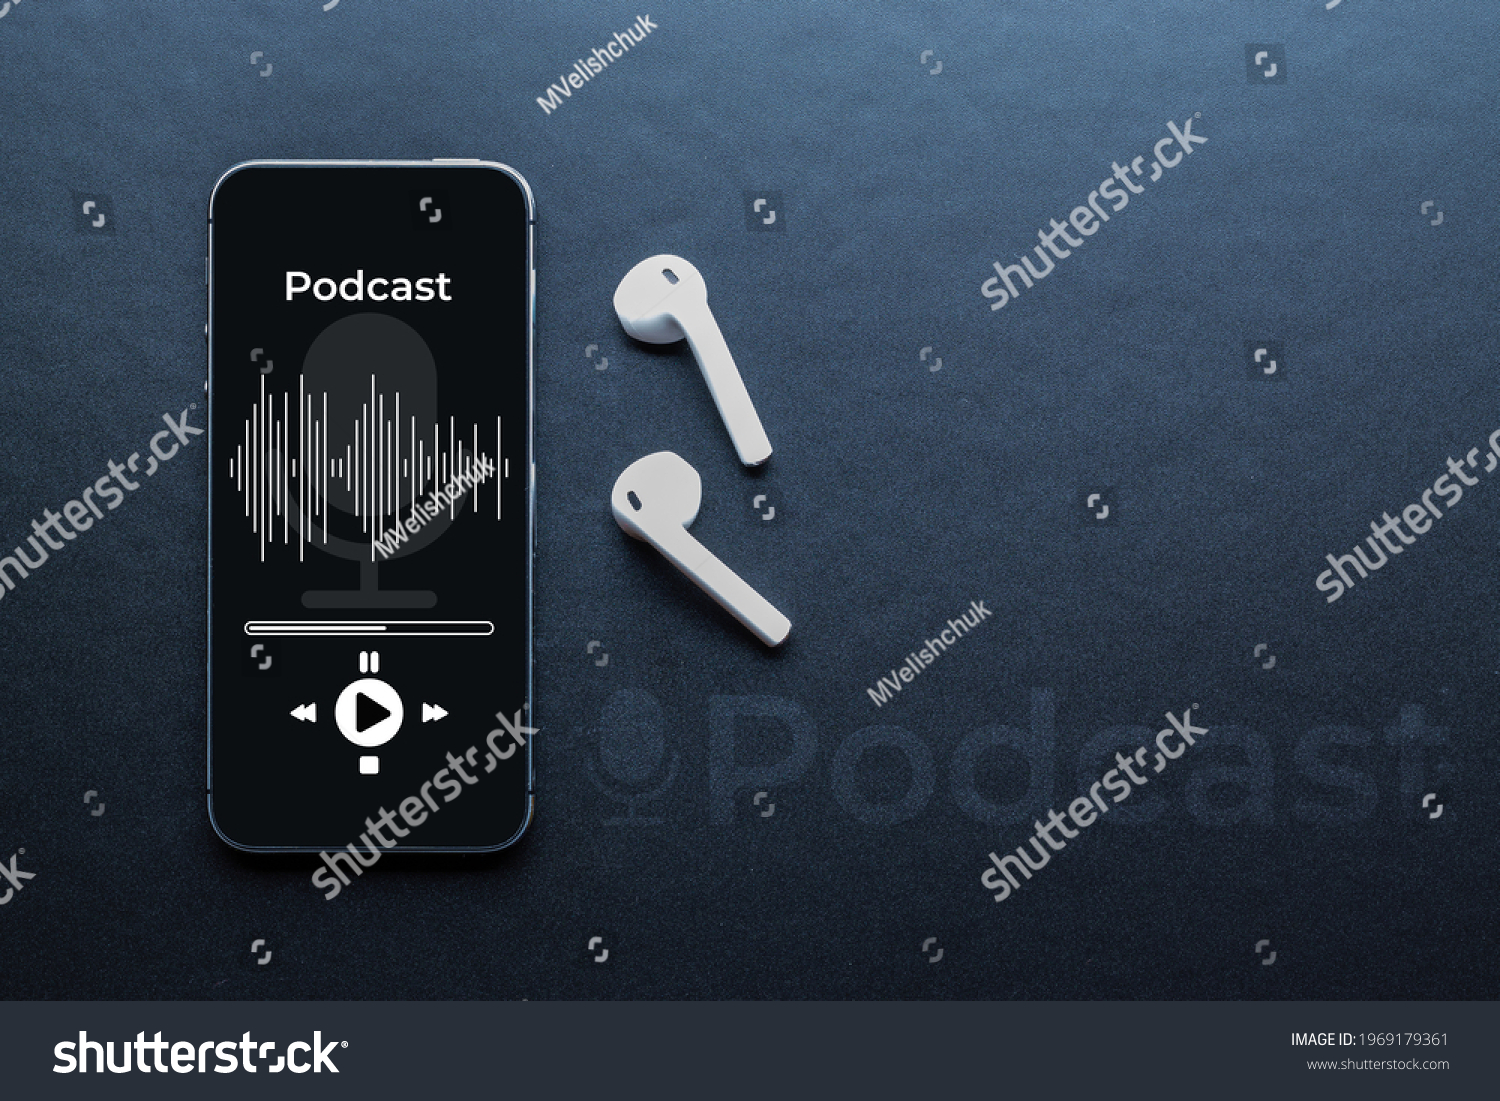 Podcast background. Mobile smartphone screen with podcast application, sound headphones. Audio voice with radio microphone on black. Recording studio or podcasting banner with copy space #1969179361